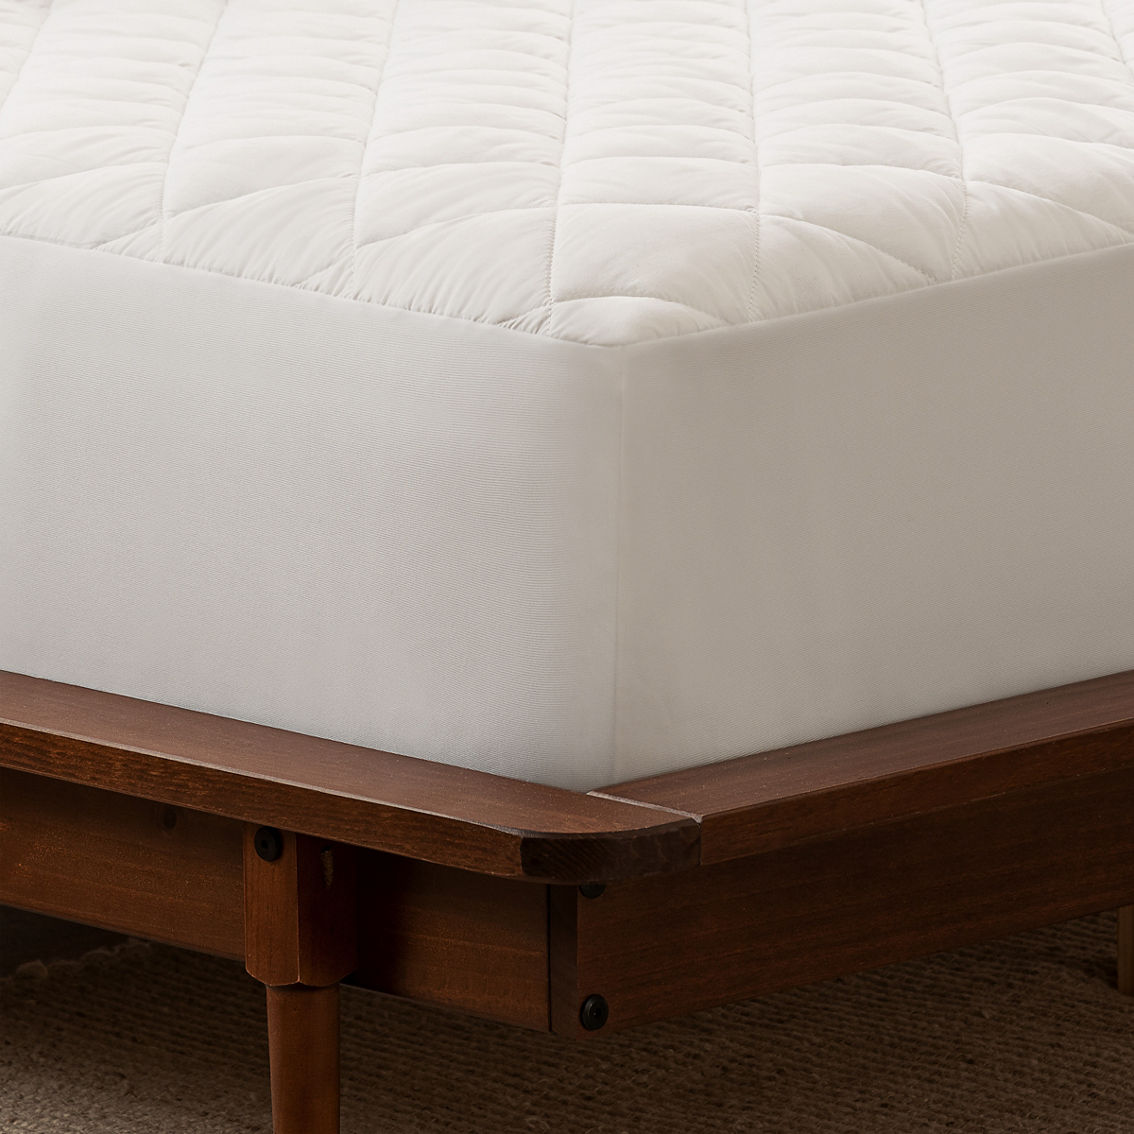 Serta Simply Clean Triple Action Mattress Pad - Image 2 of 4